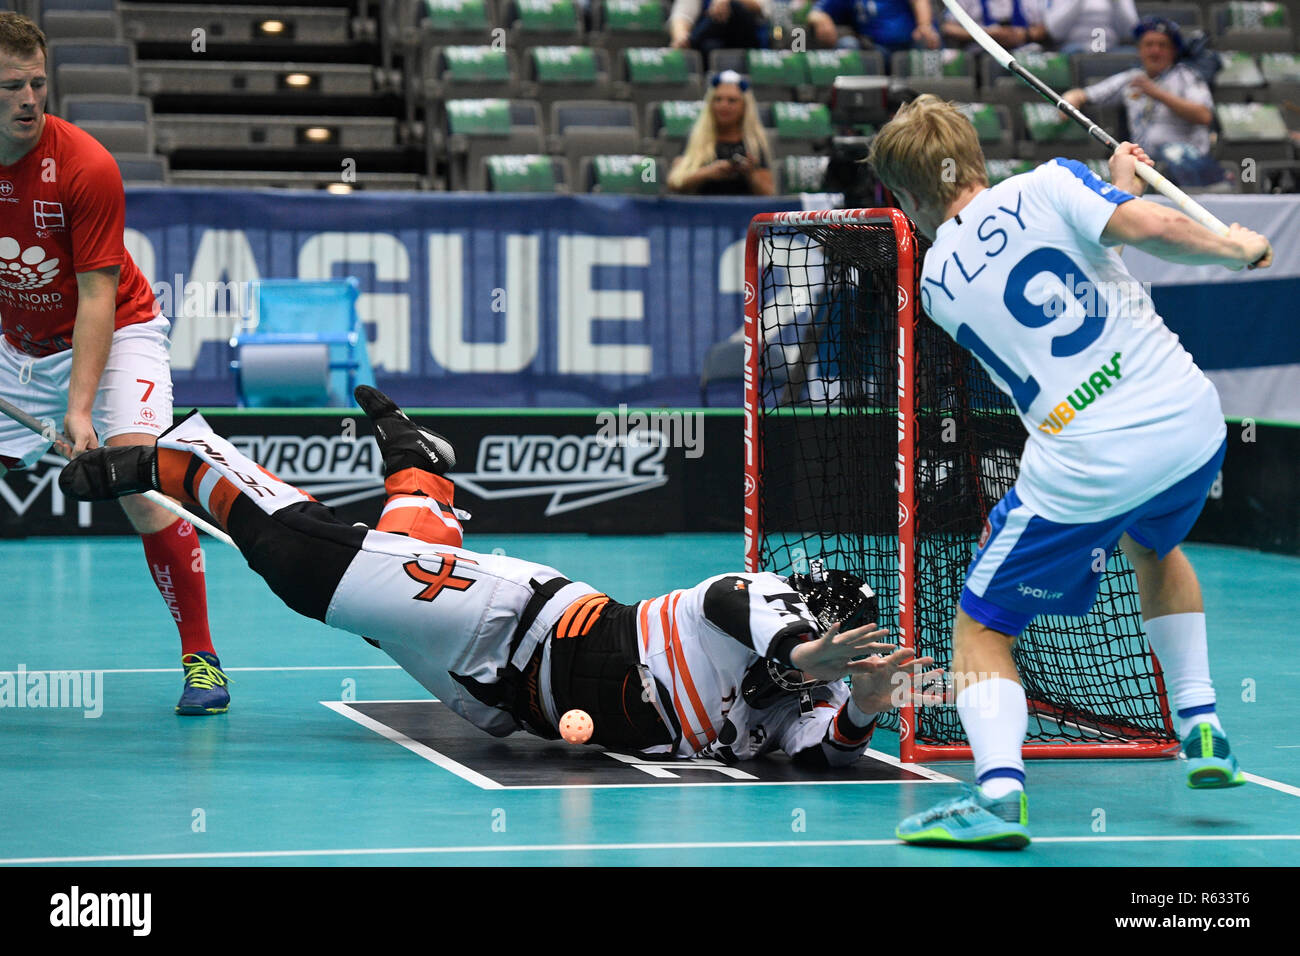 Prague, Czech Republic. 03rd Dec, 2018. Left to right floorball players  ANDERS HOLM (DK), MIKE TROLLE (DK) and JOONAS PYLSY (FIN) in action during  the Men's World Floorball Championship group B match